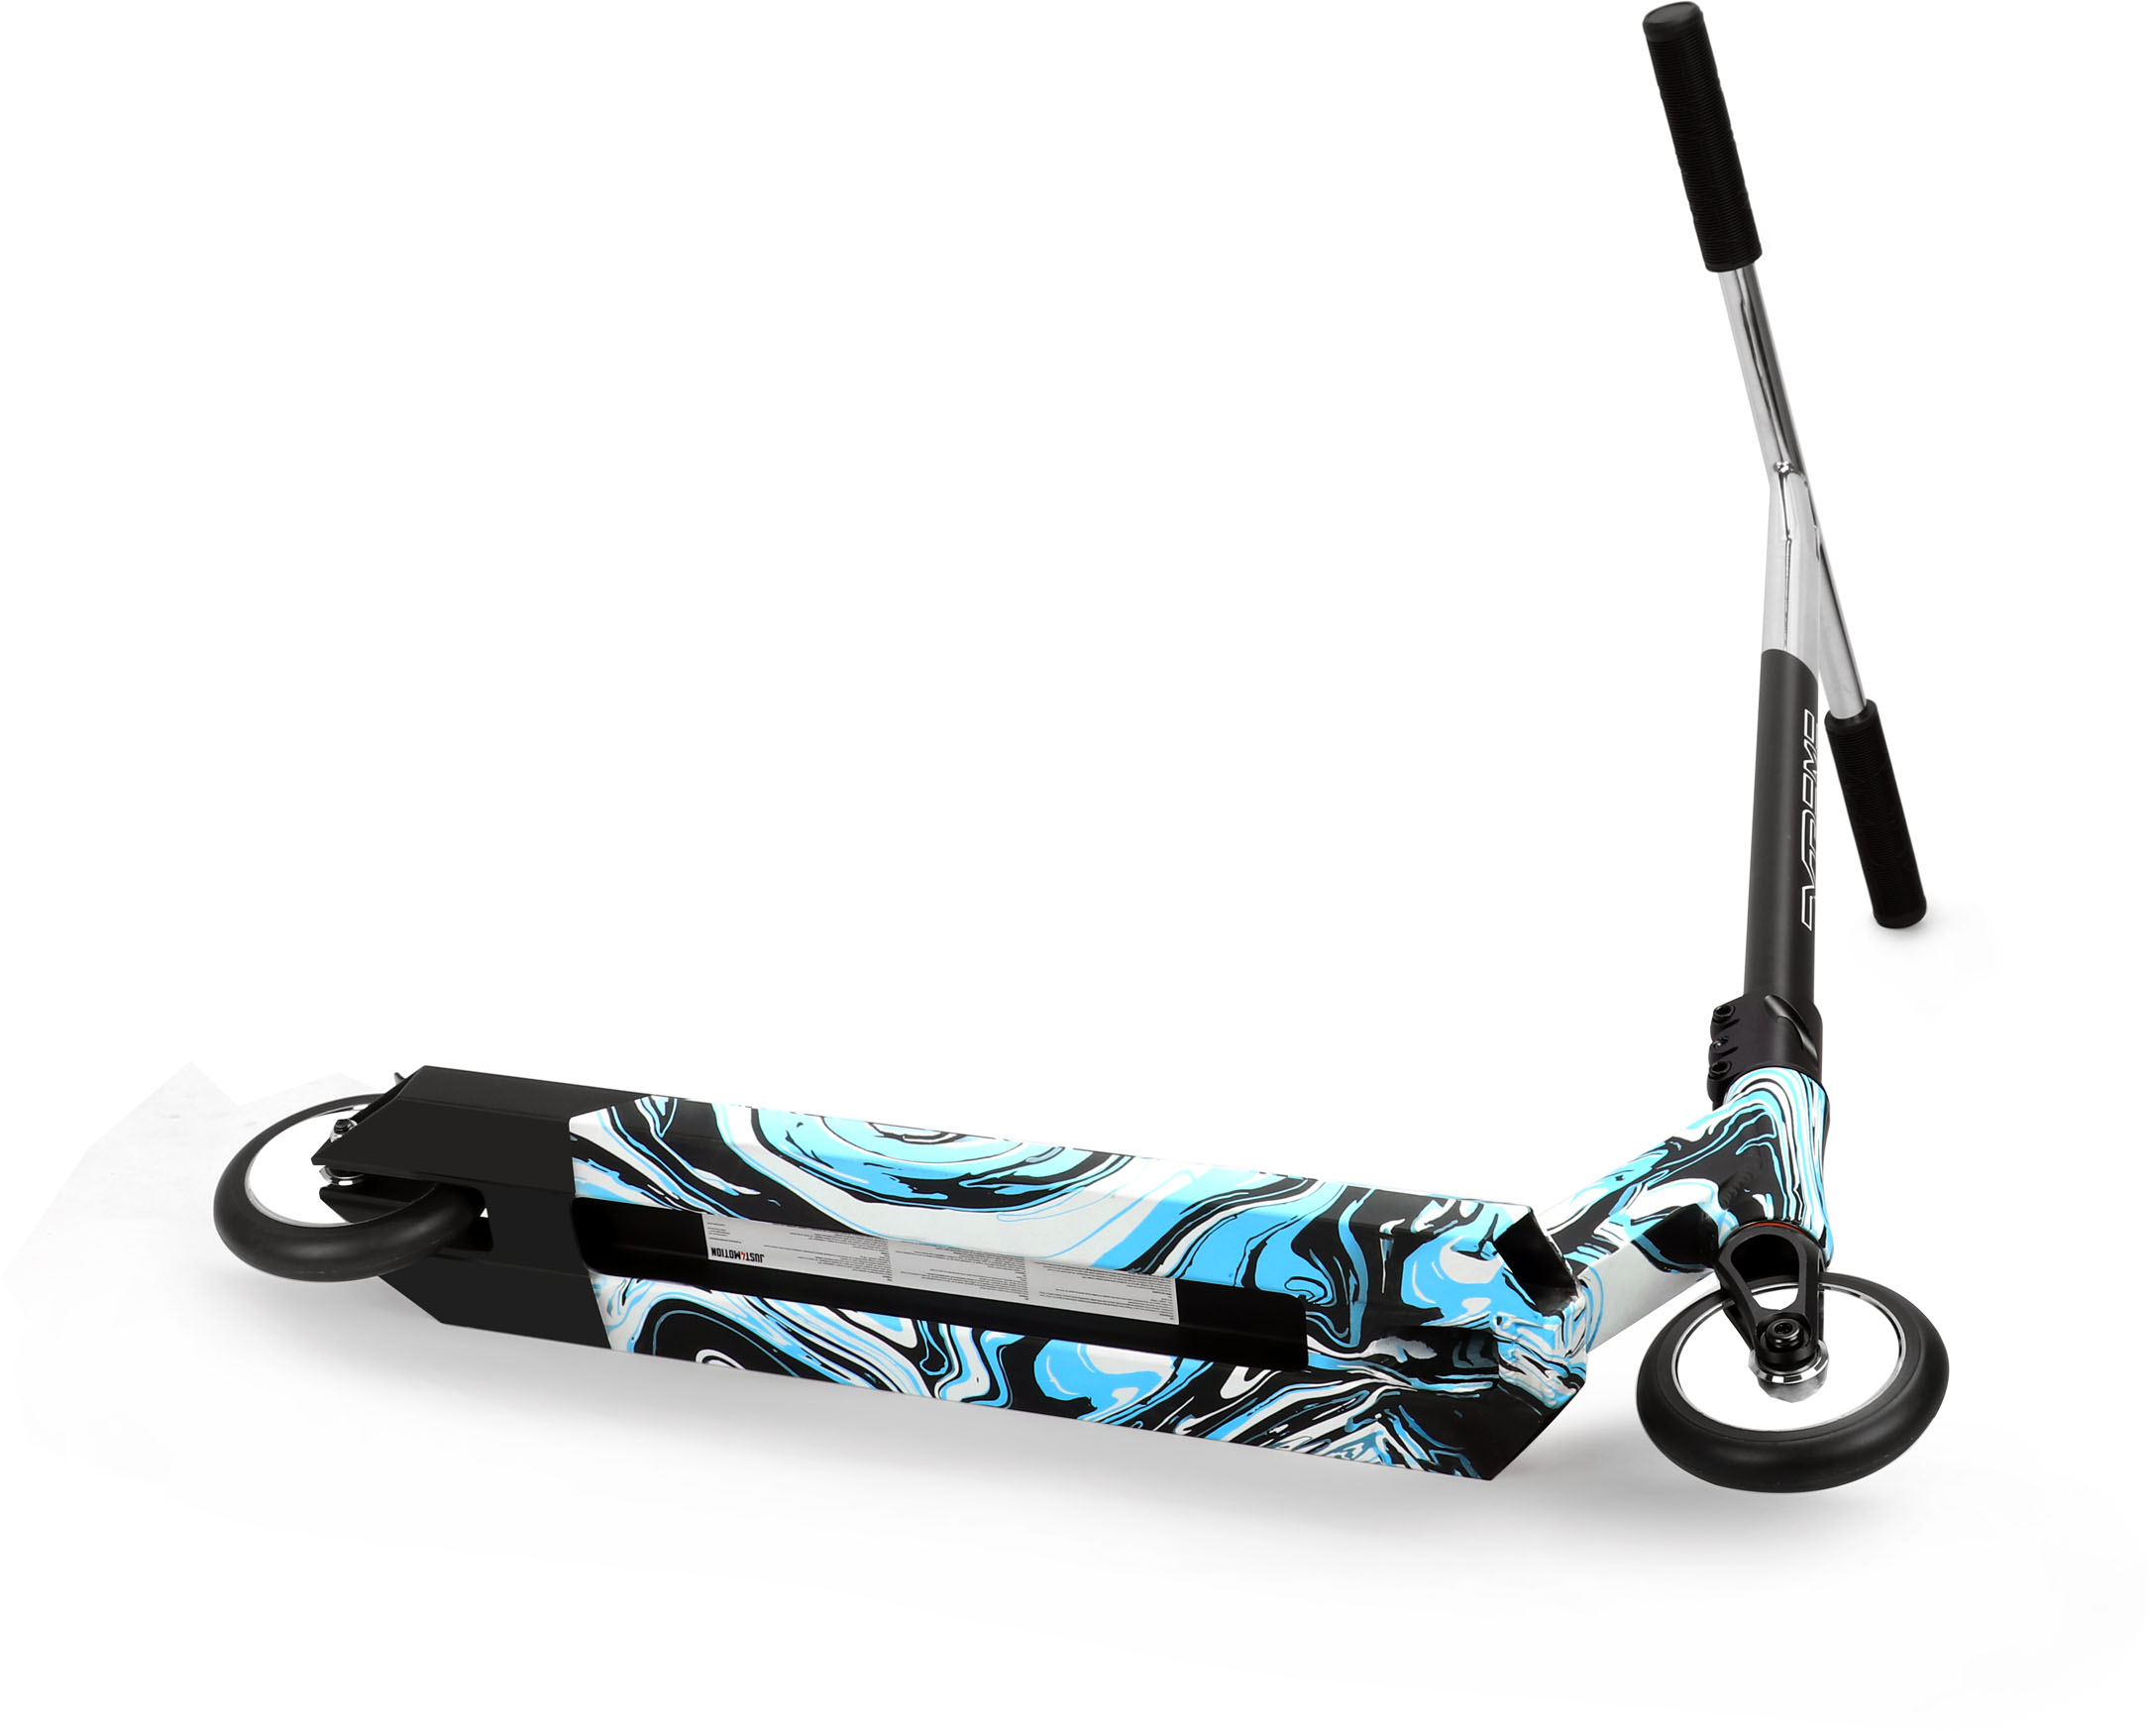 Motion Freestyle Scooter | Xtreme | Wave